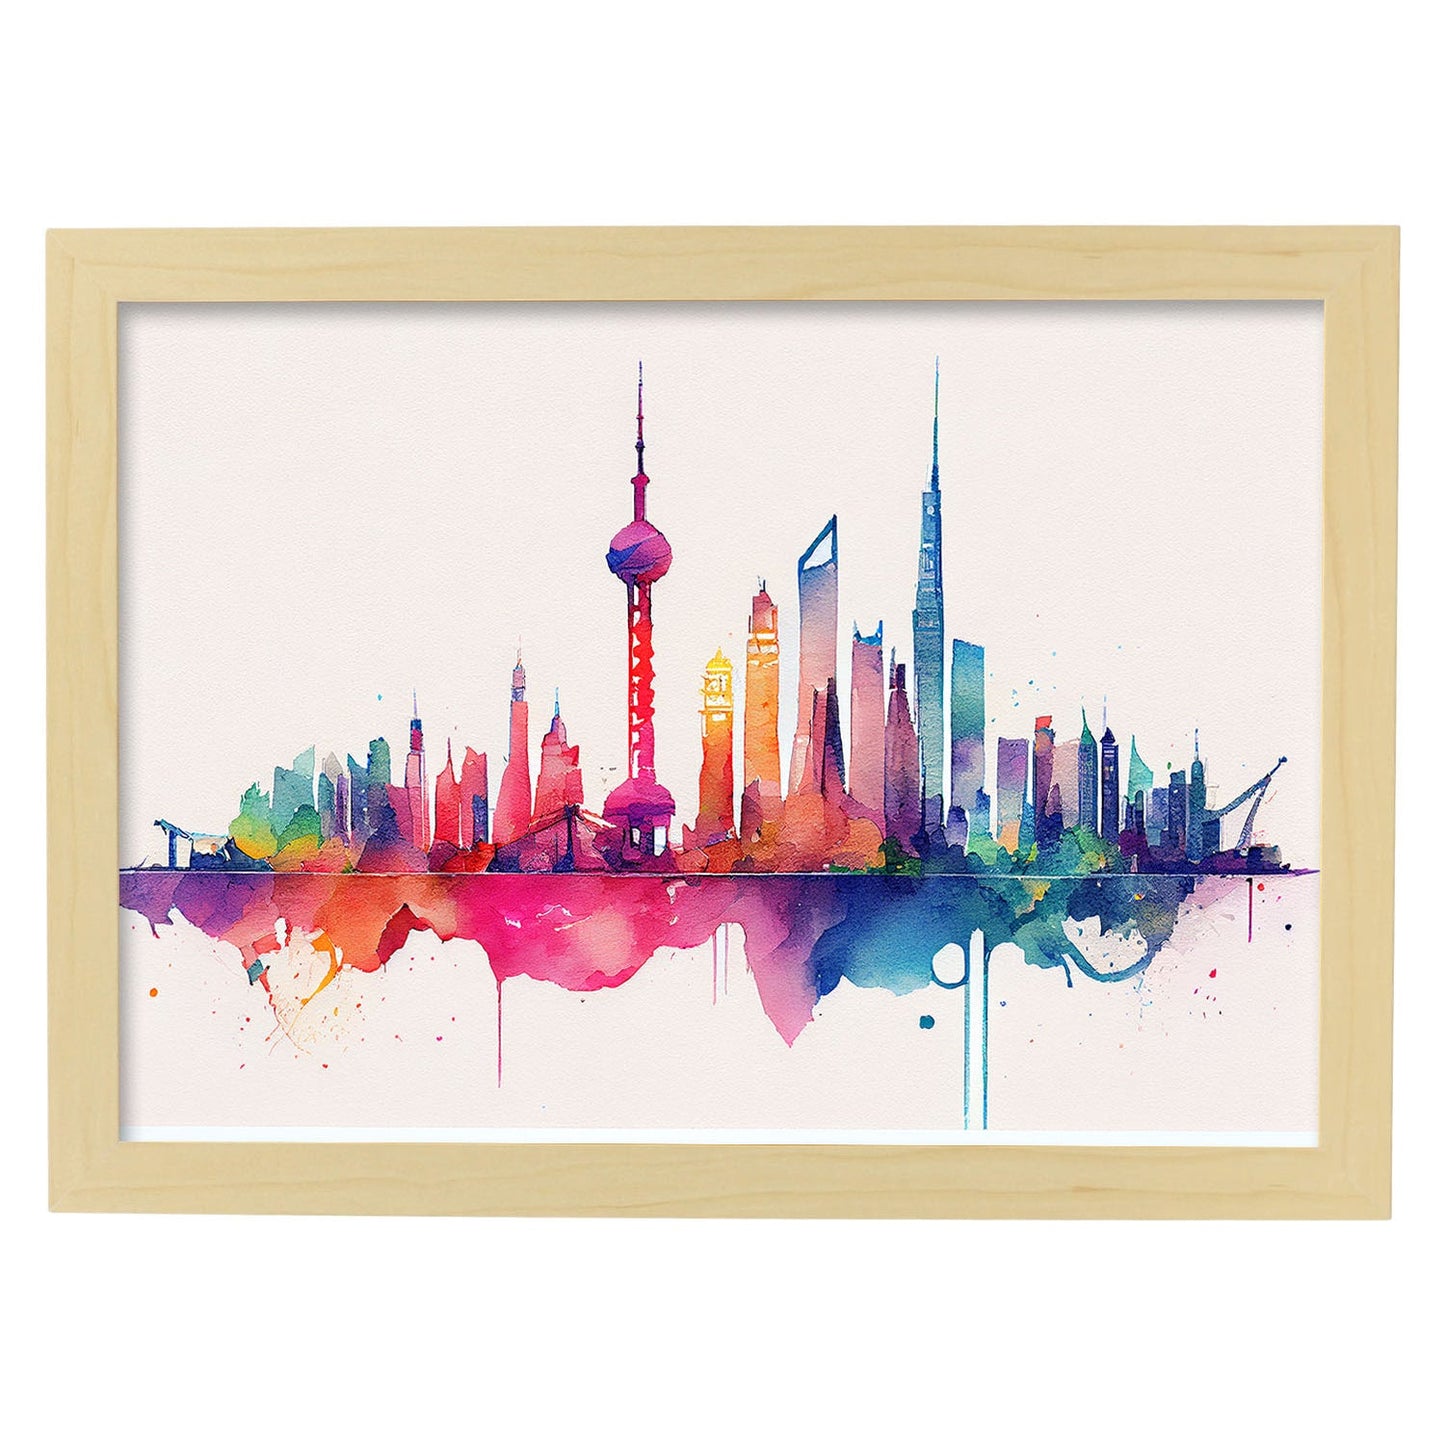 Nacnic watercolor of a skyline of the city of Shanghai_5. Aesthetic Wall Art Prints for Bedroom or Living Room Design.-Artwork-Nacnic-A4-Marco Madera Clara-Nacnic Estudio SL